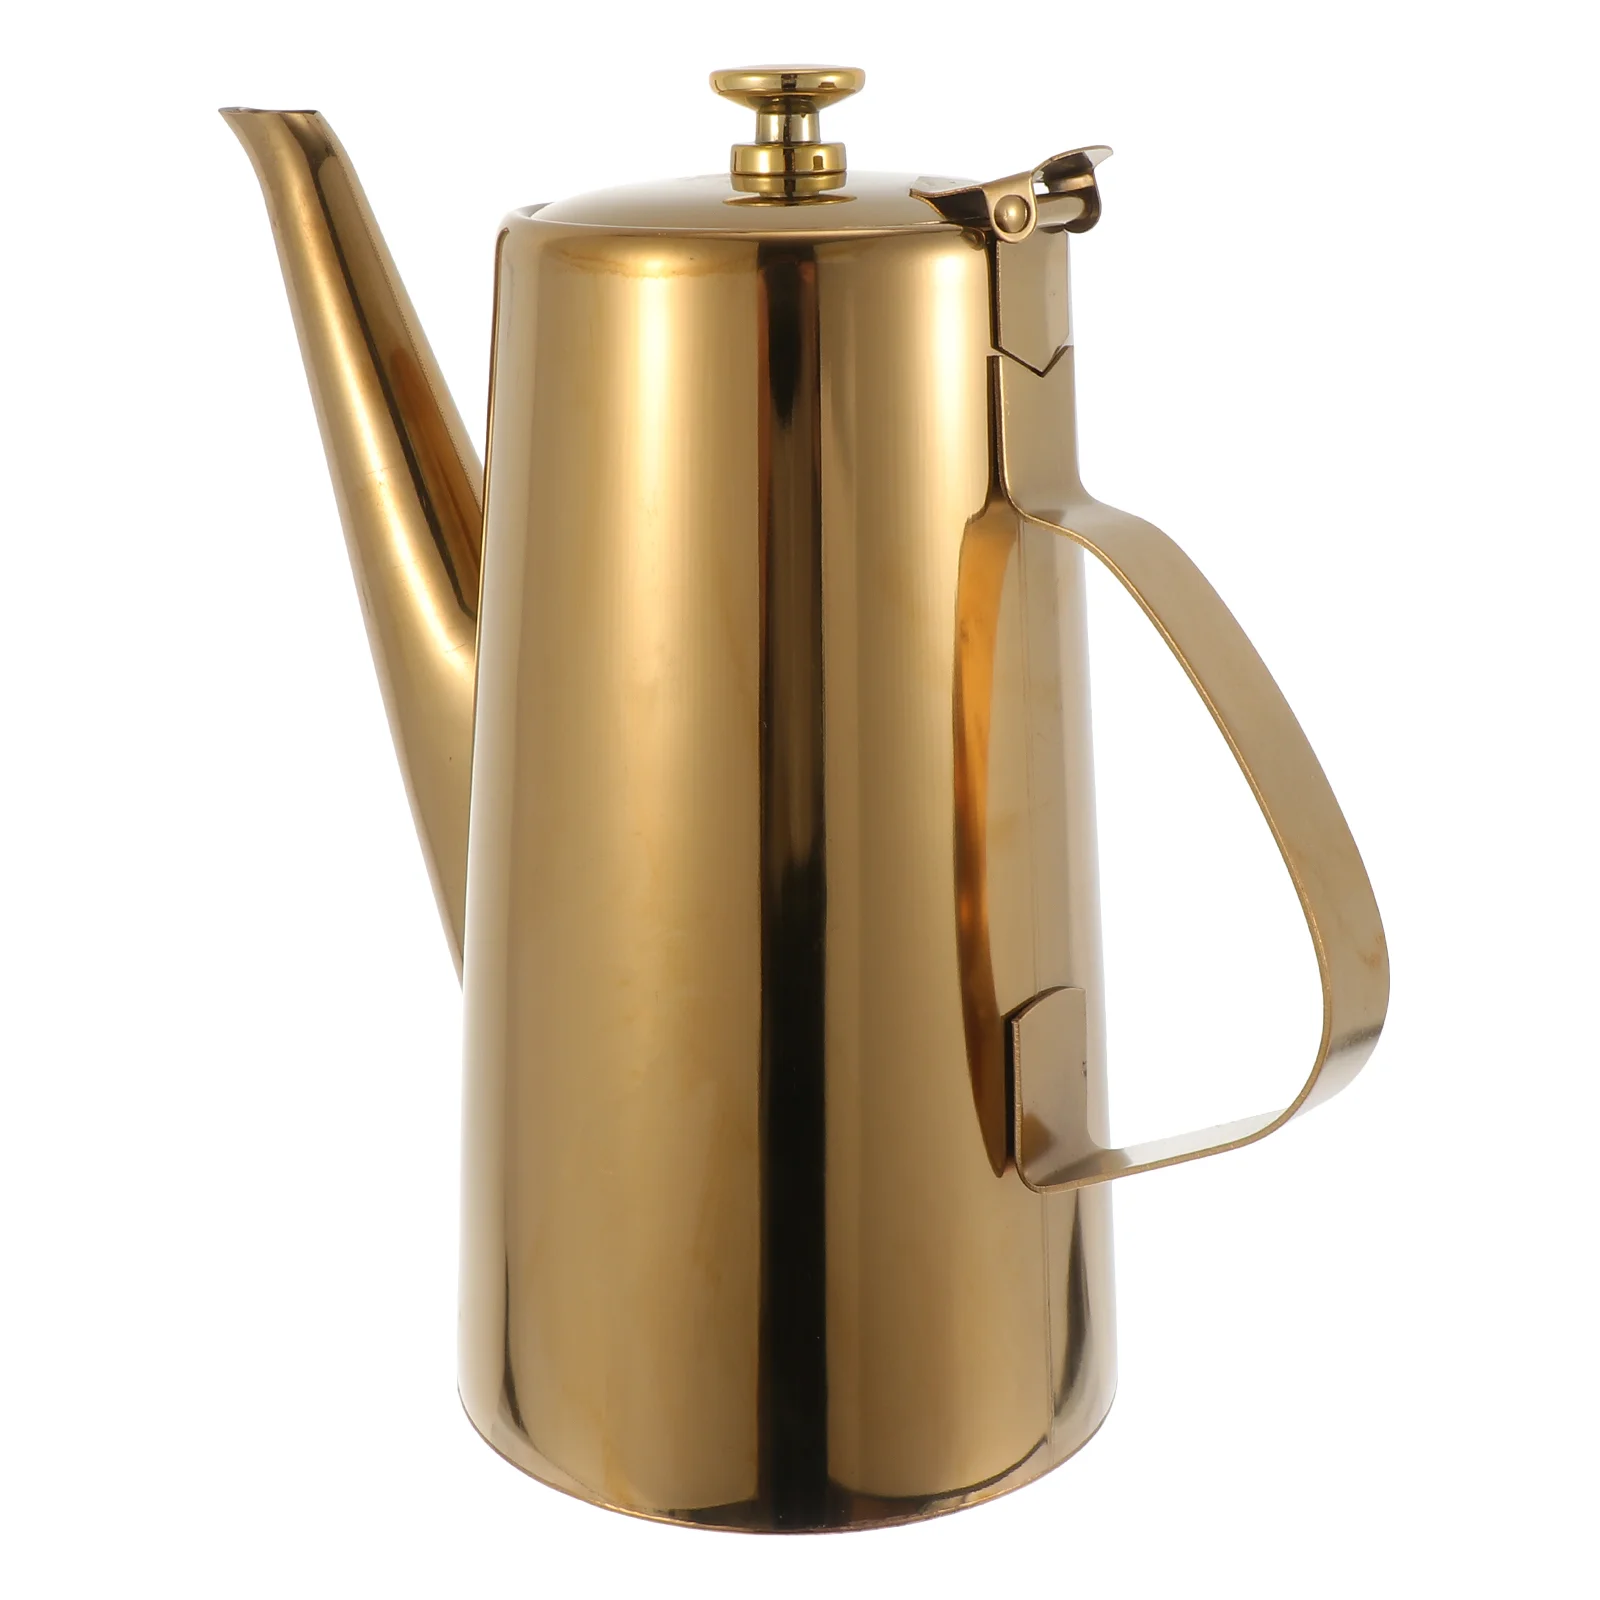 

Cabilock Grease Container Olive Oil Dispenser Bottle Stainless Steel Spout Oil Pot Drip Free Pouring Spout Soy Sauce